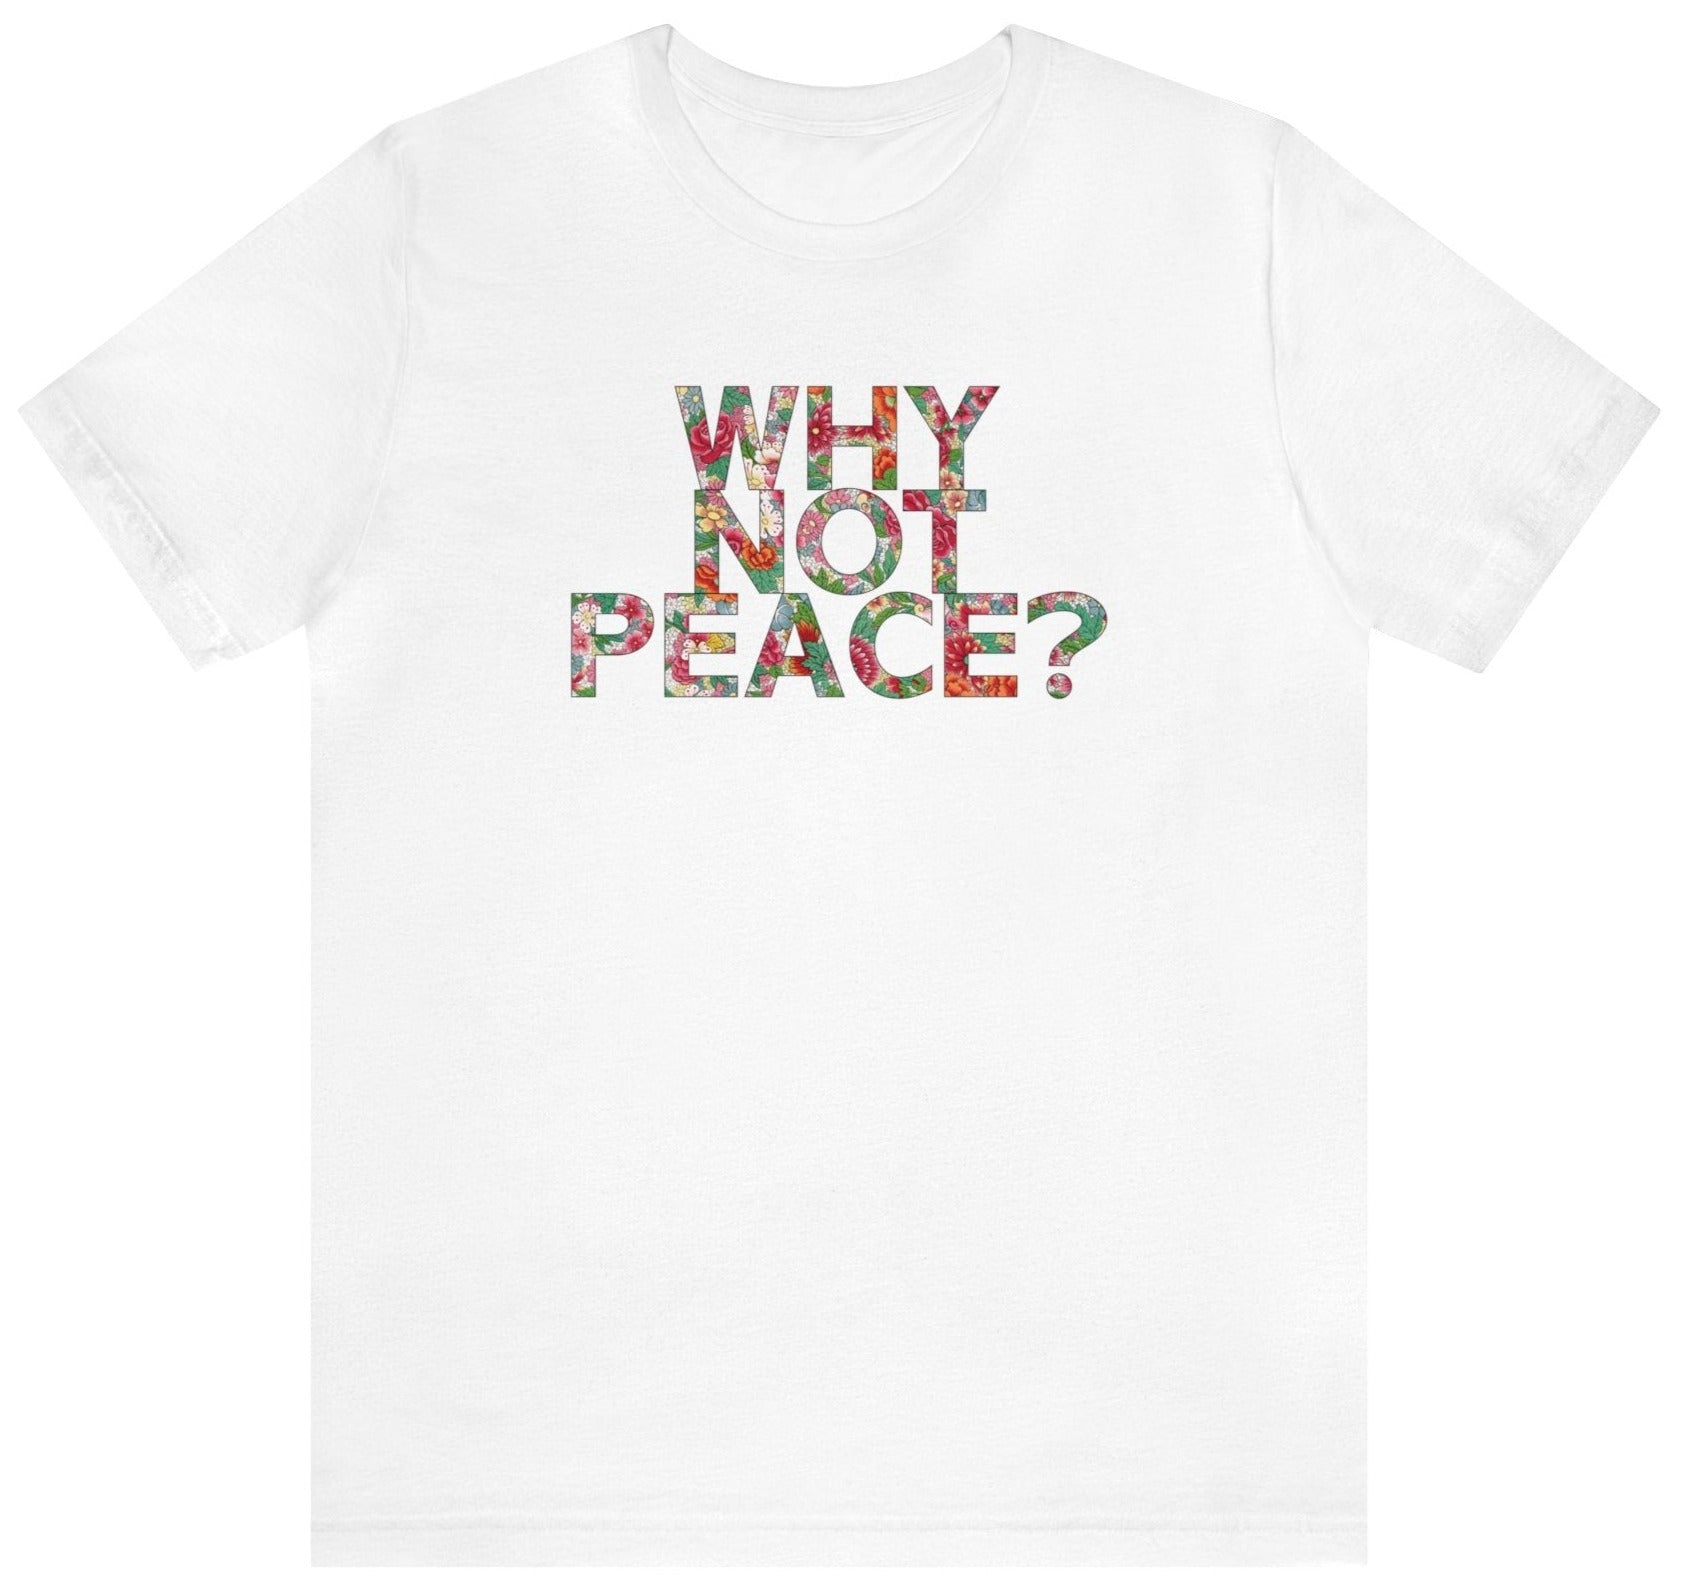 Why not peace t shirt